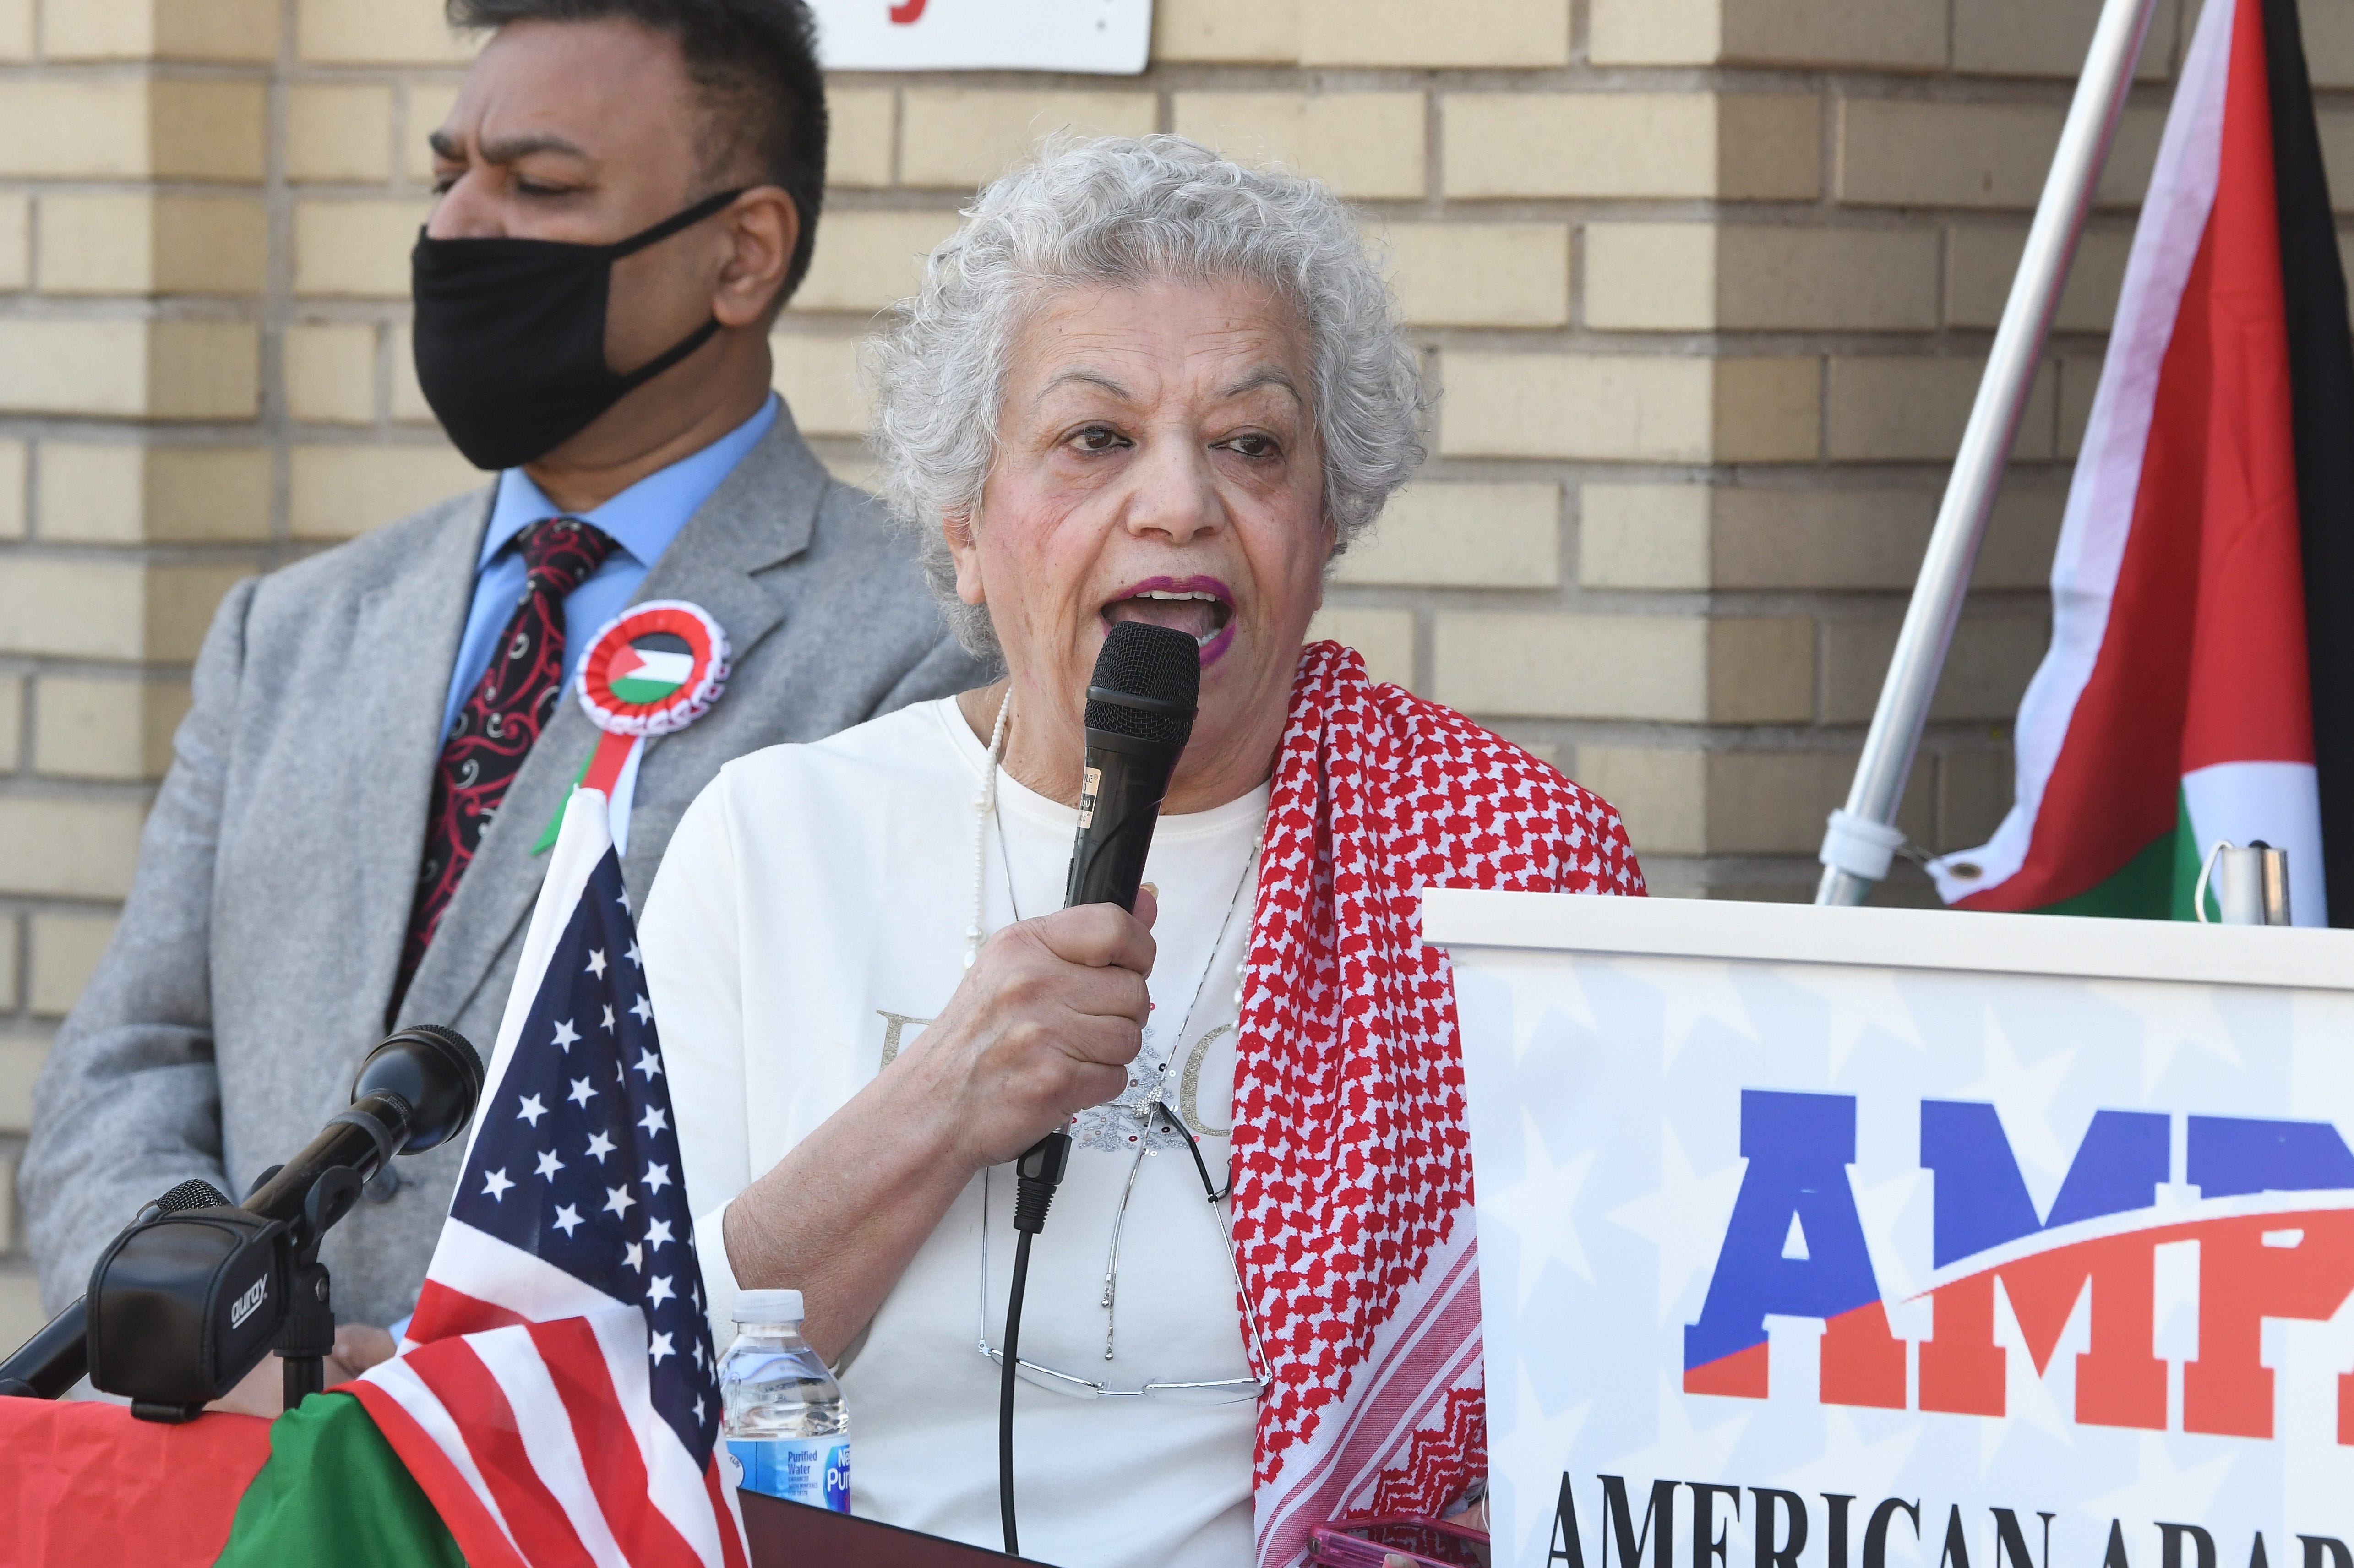 Nada Dalgamouni, global education director of the International Institute of Metropolitan Detroit, Inc. speaks during a news conference to urge the Biden administration take immediate action at the AMS Mosque in Dearborn, Michigan on May 18, 2021.